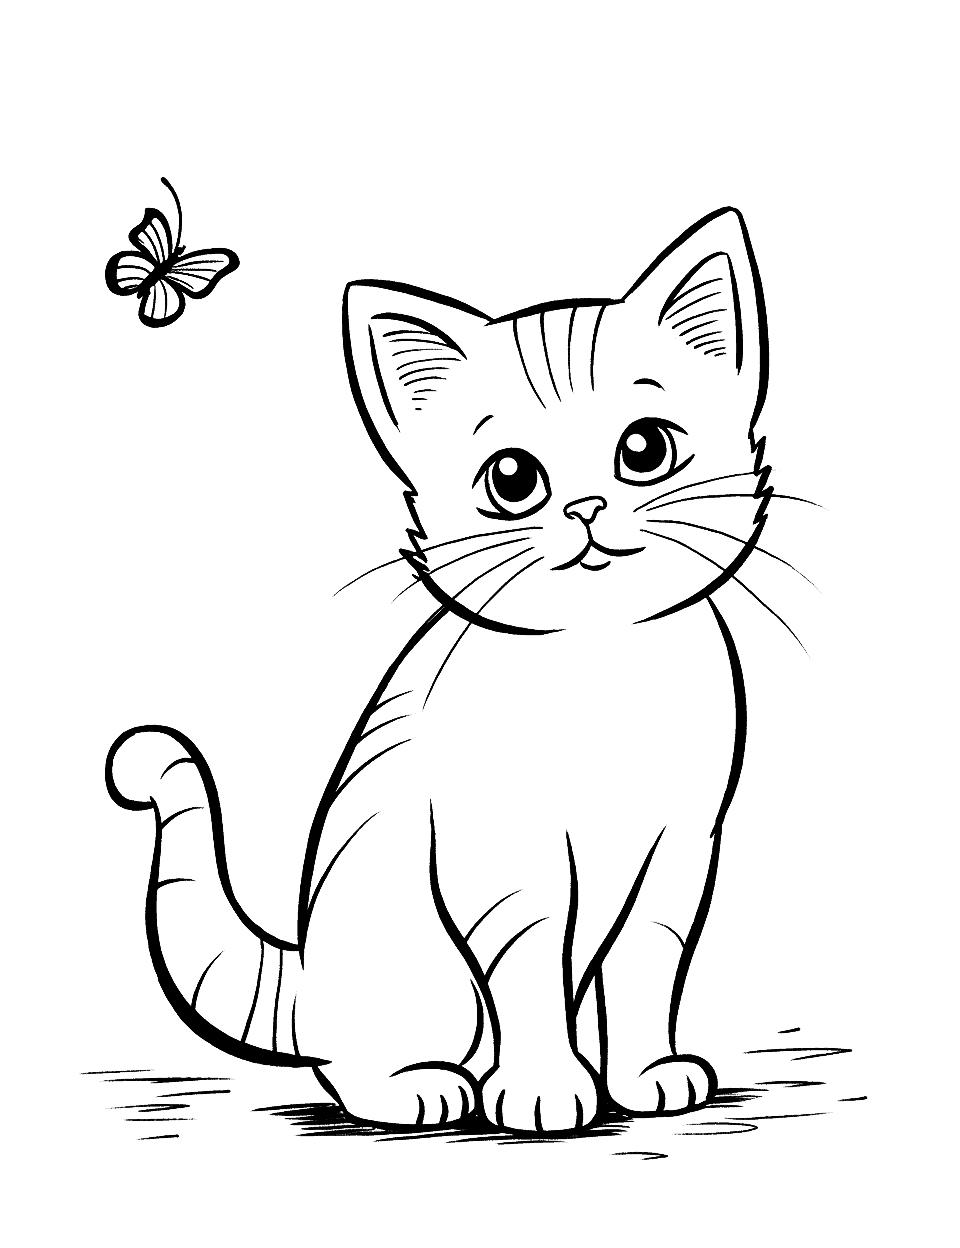 Preschool Cat and Butterfly Coloring Page - A simple coloring page featuring a cat watching a butterfly, perfect for preschool kids.